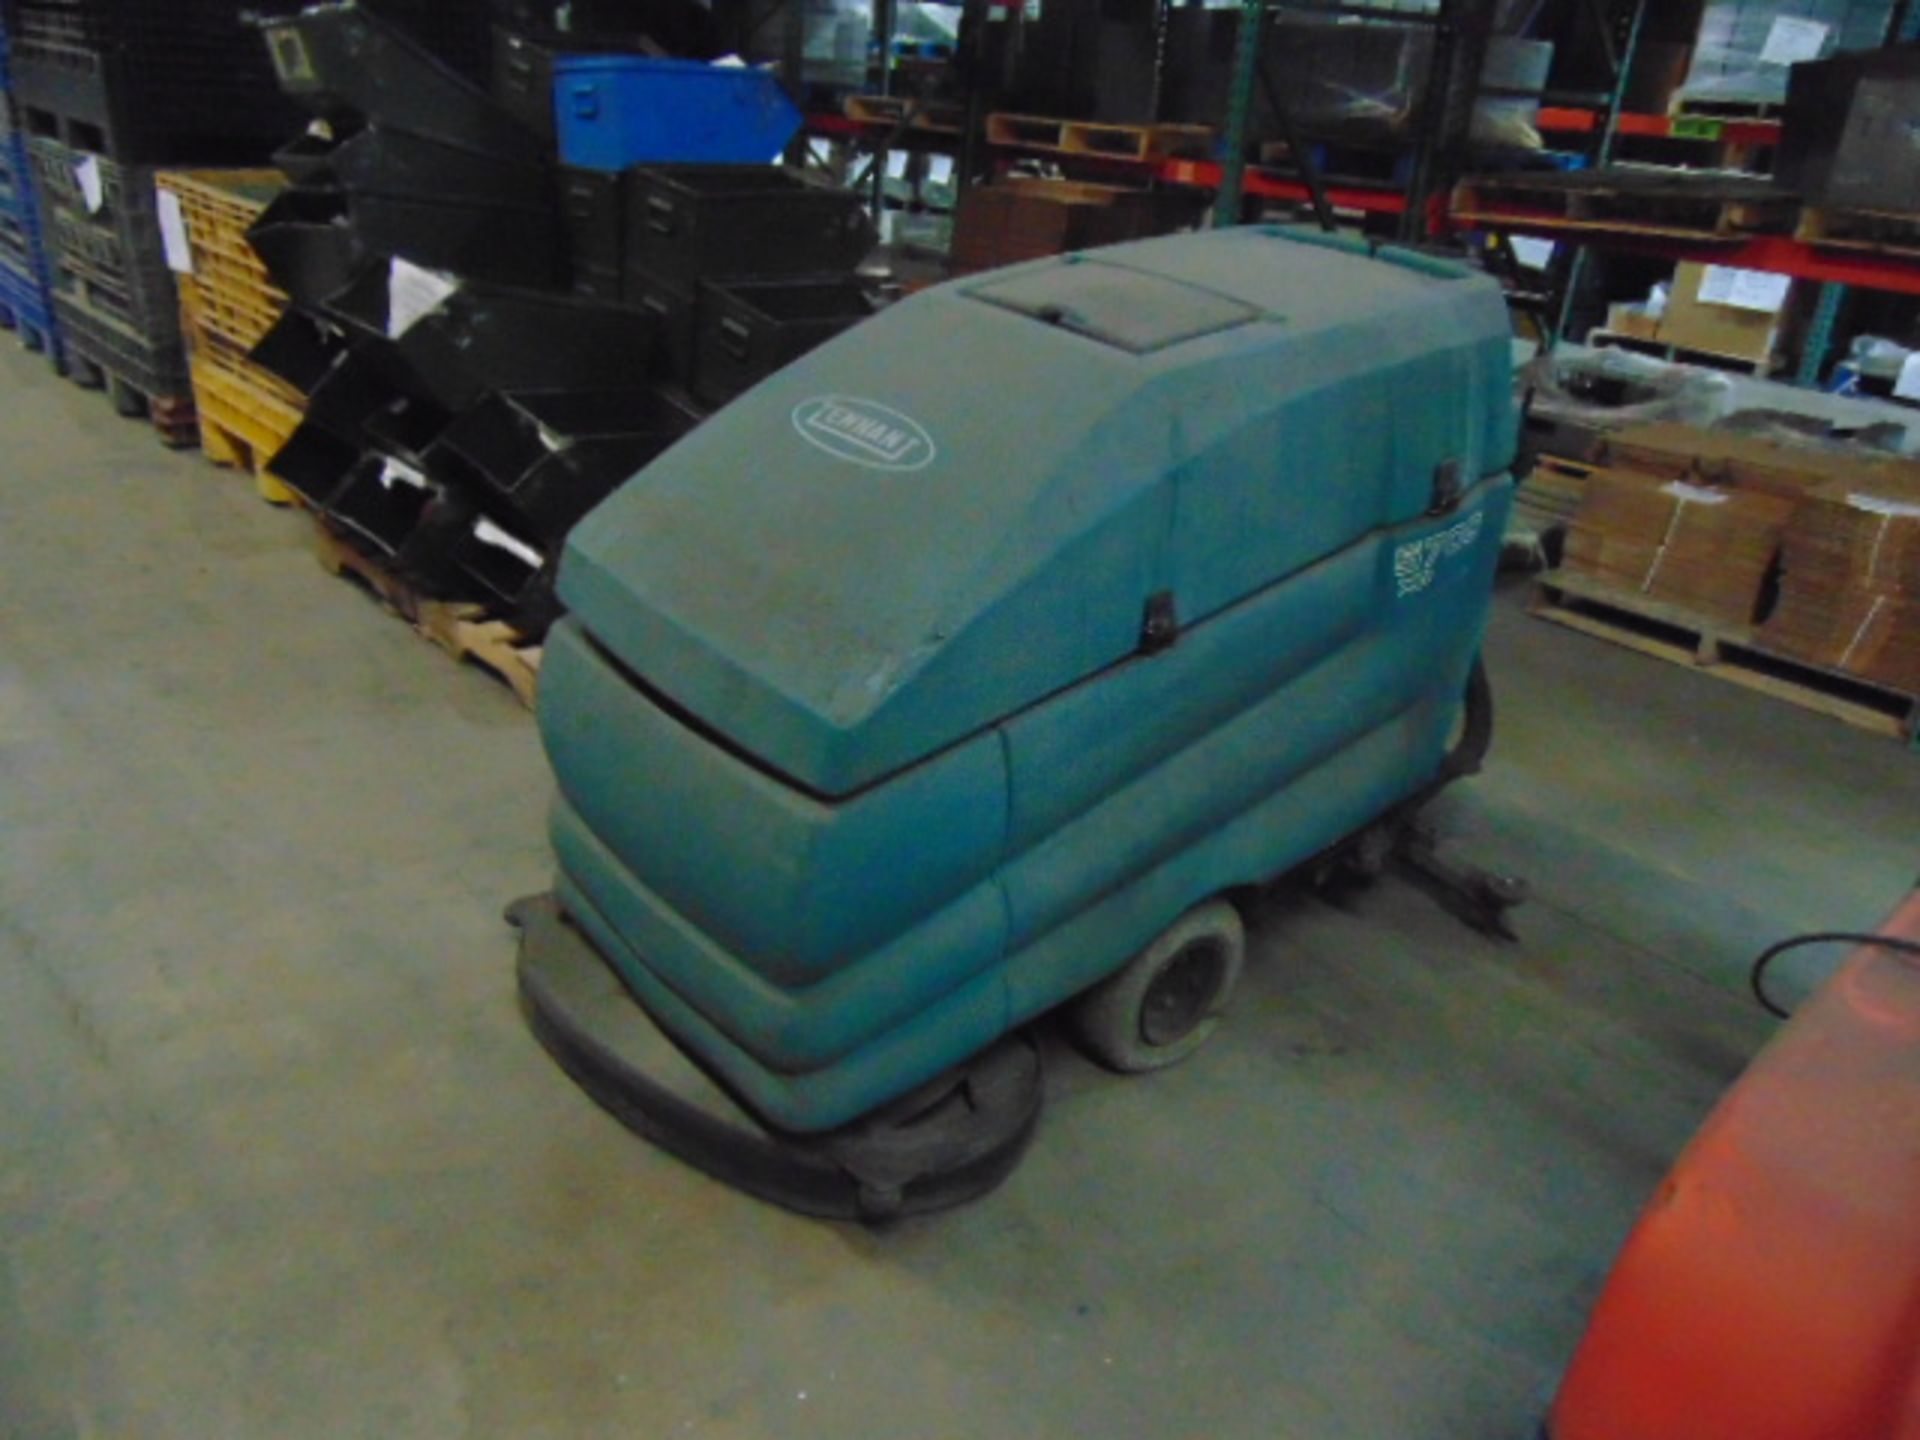 WALK BEHIND FLOOR SCRUBBER, TENNANT MDL. 5700XP, battery pwrd. (out of service)